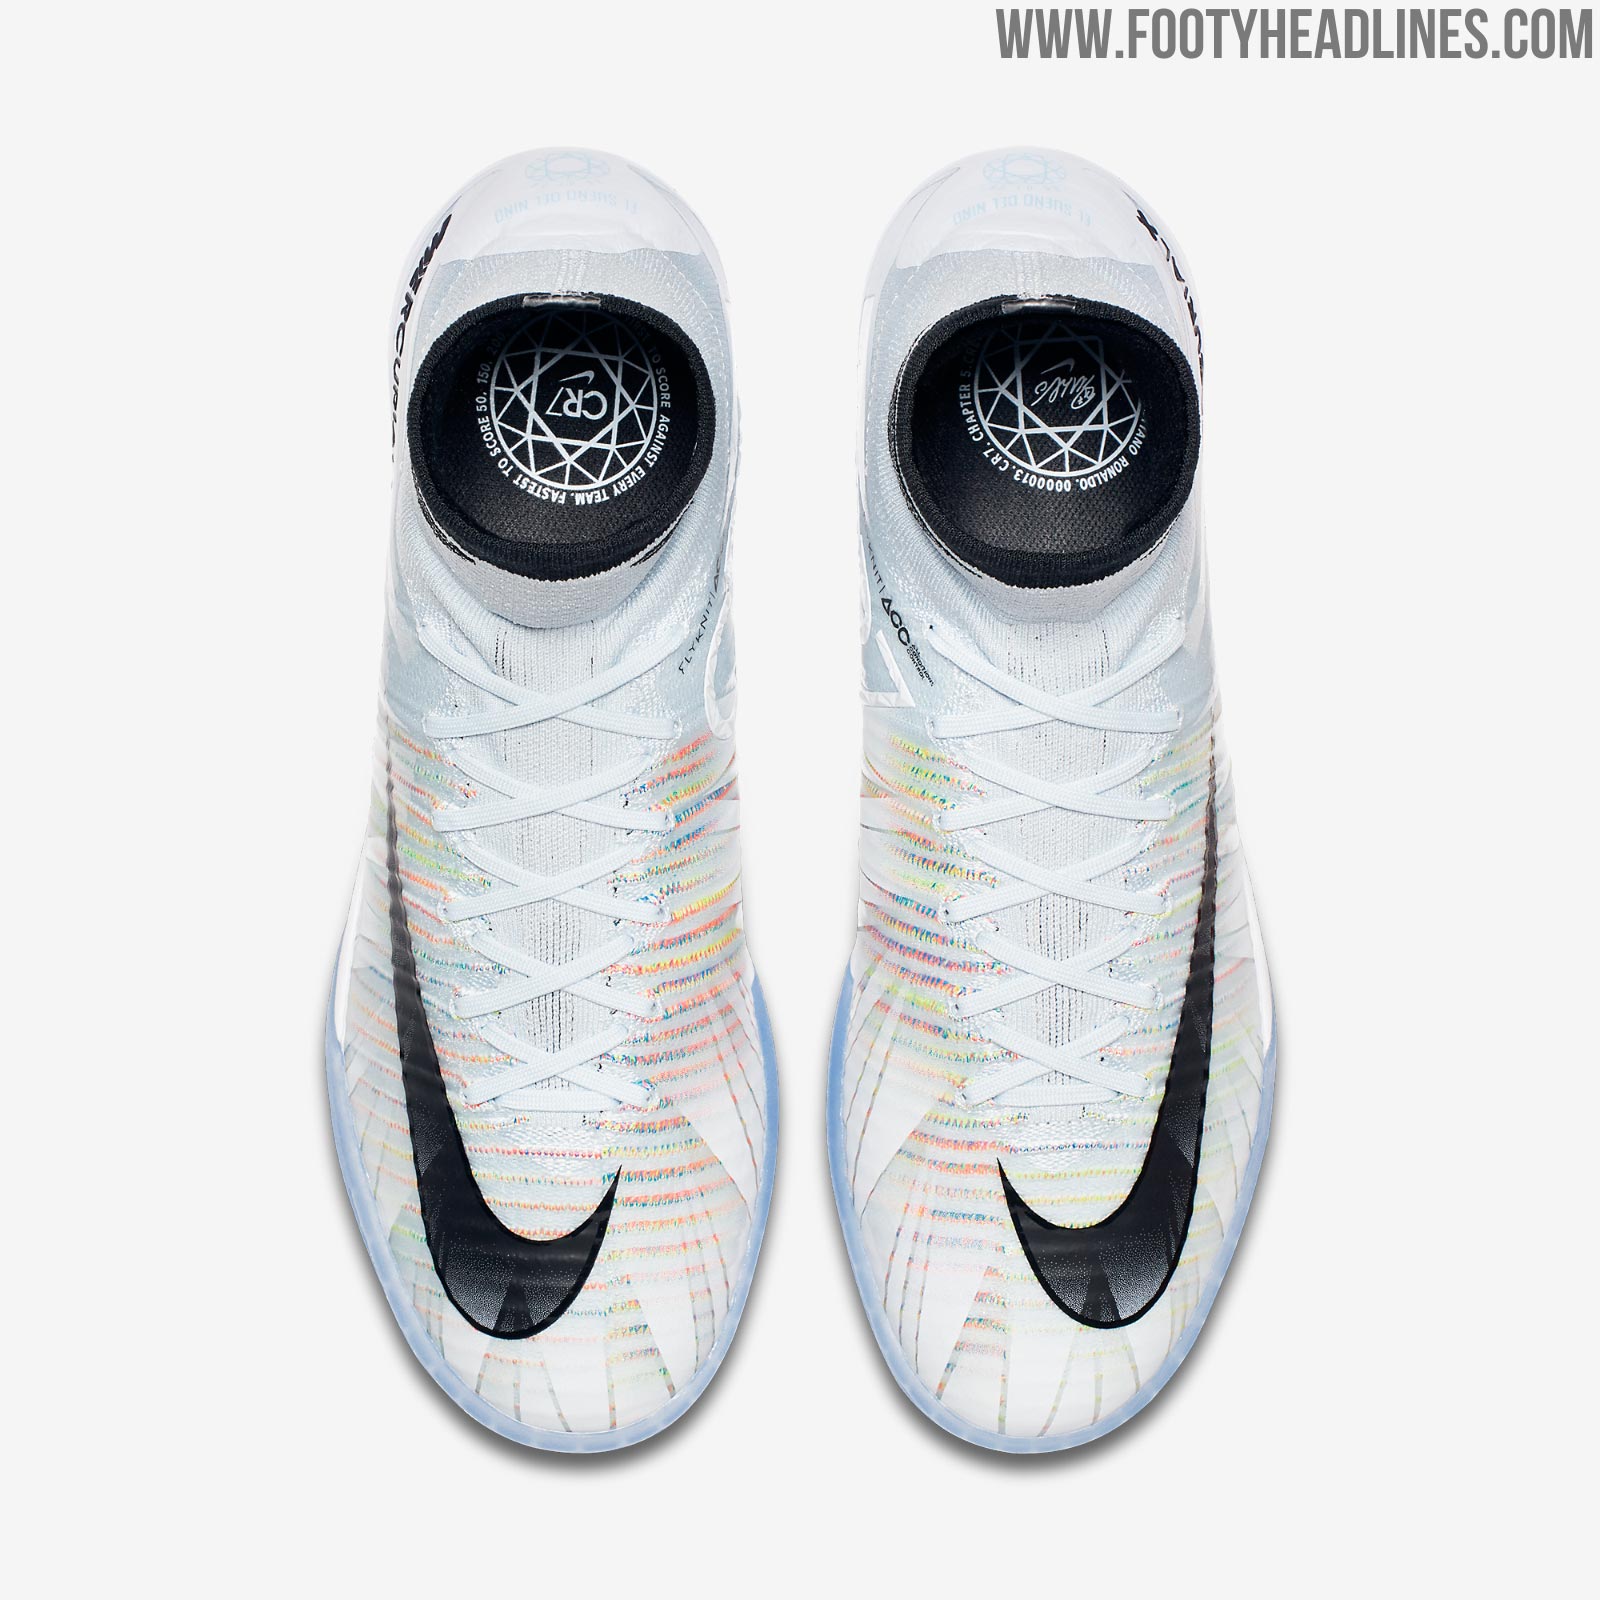 nike-mercurialx-proximo-cr7-cut-to-brilliance-indoor-turf-shoes-4.jpg